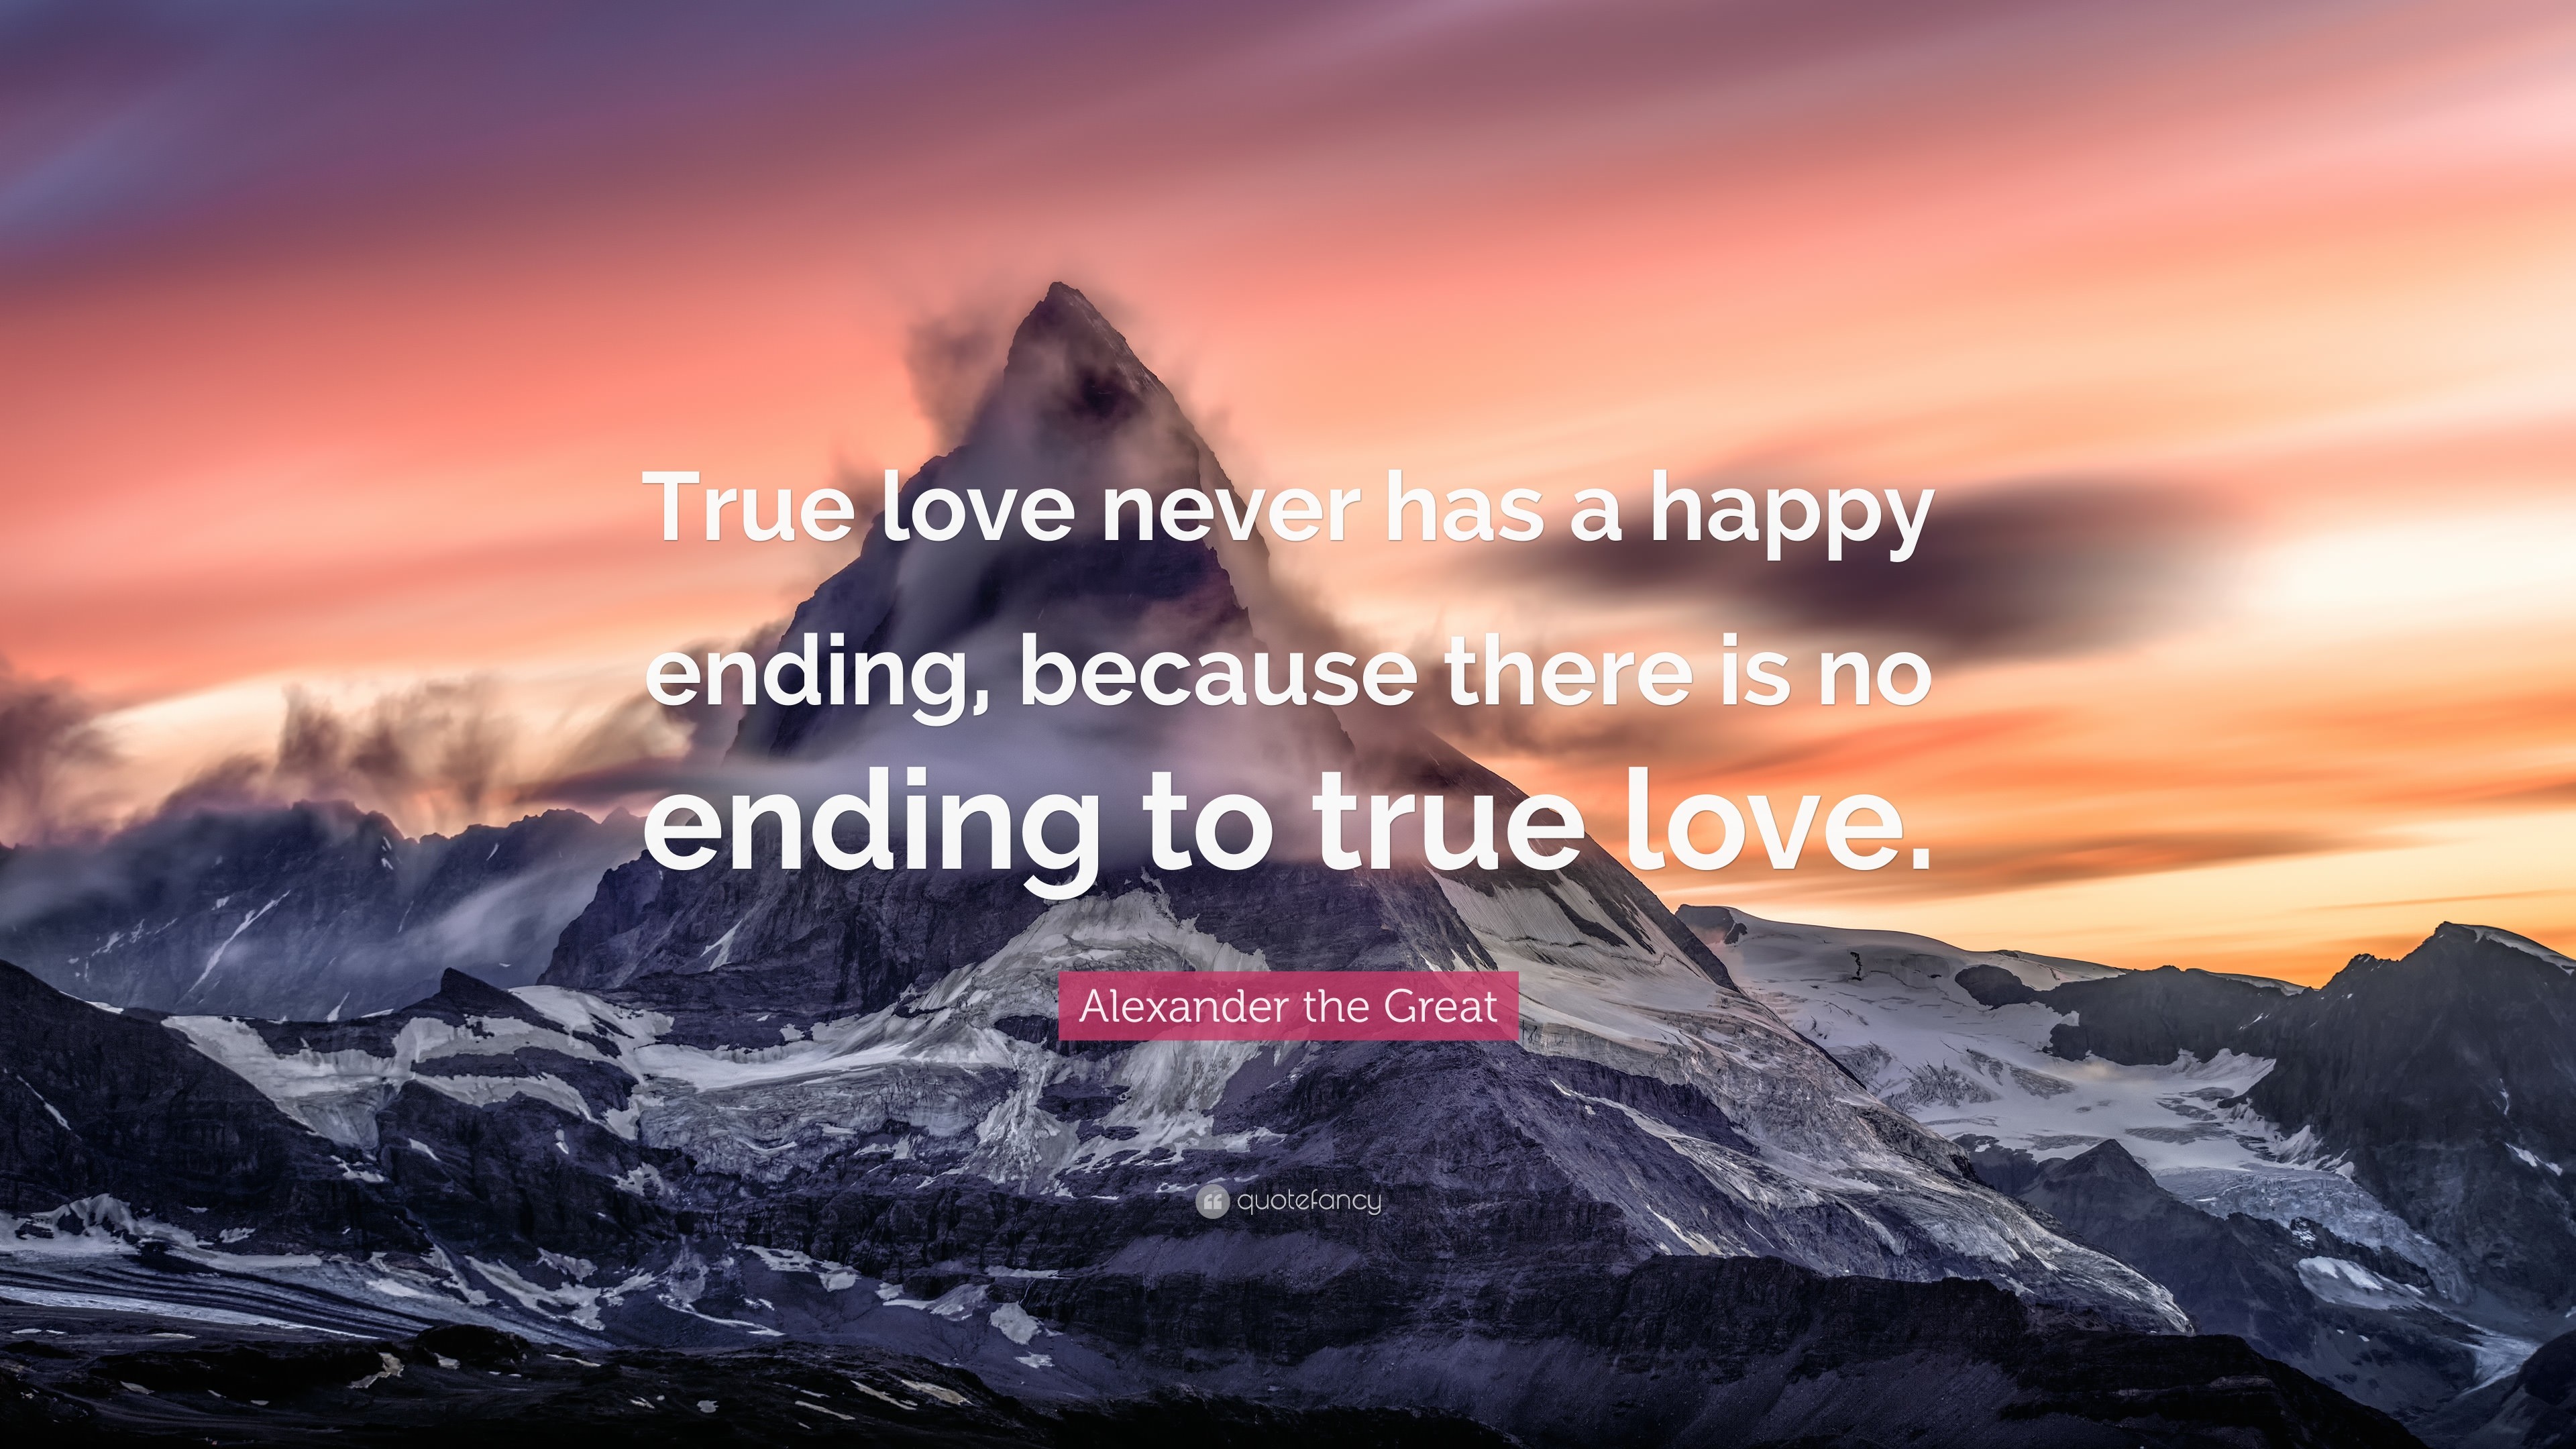 3840x2160 Alexander the Great Quote: “True love never has a happy ending, because  there